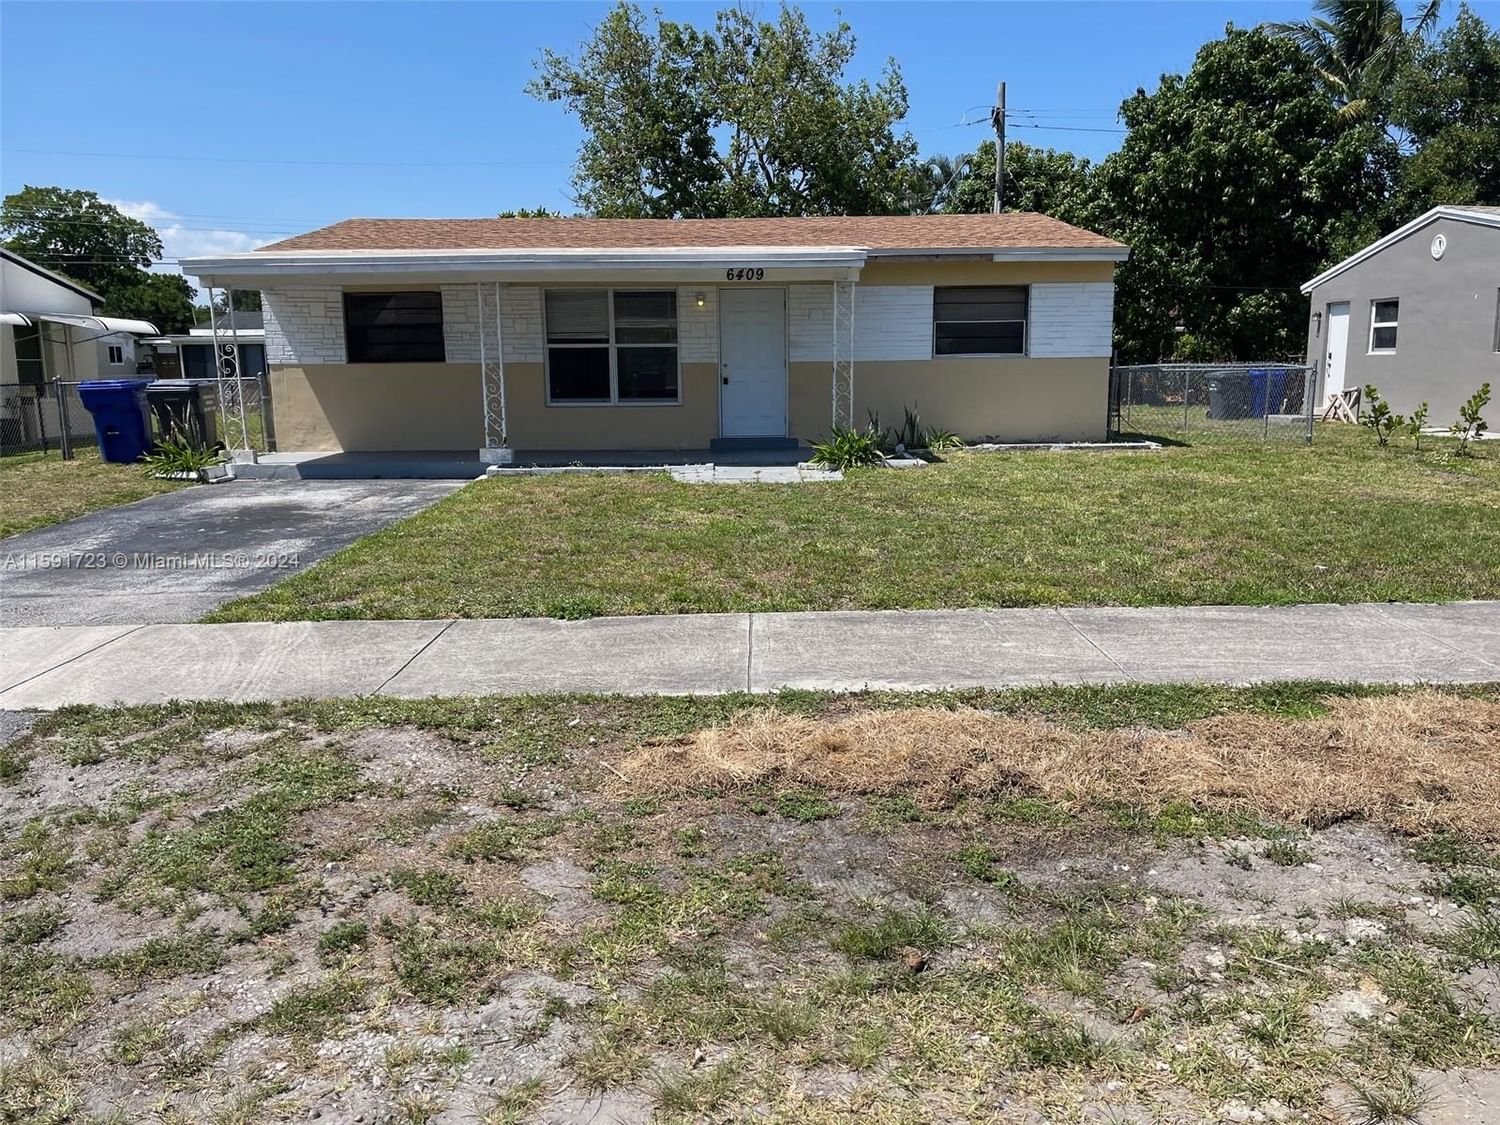 Real estate property located at 6409 Dawson St, Broward County, HOLLYWOOD HEIGHTS ESTATES, Hollywood, FL